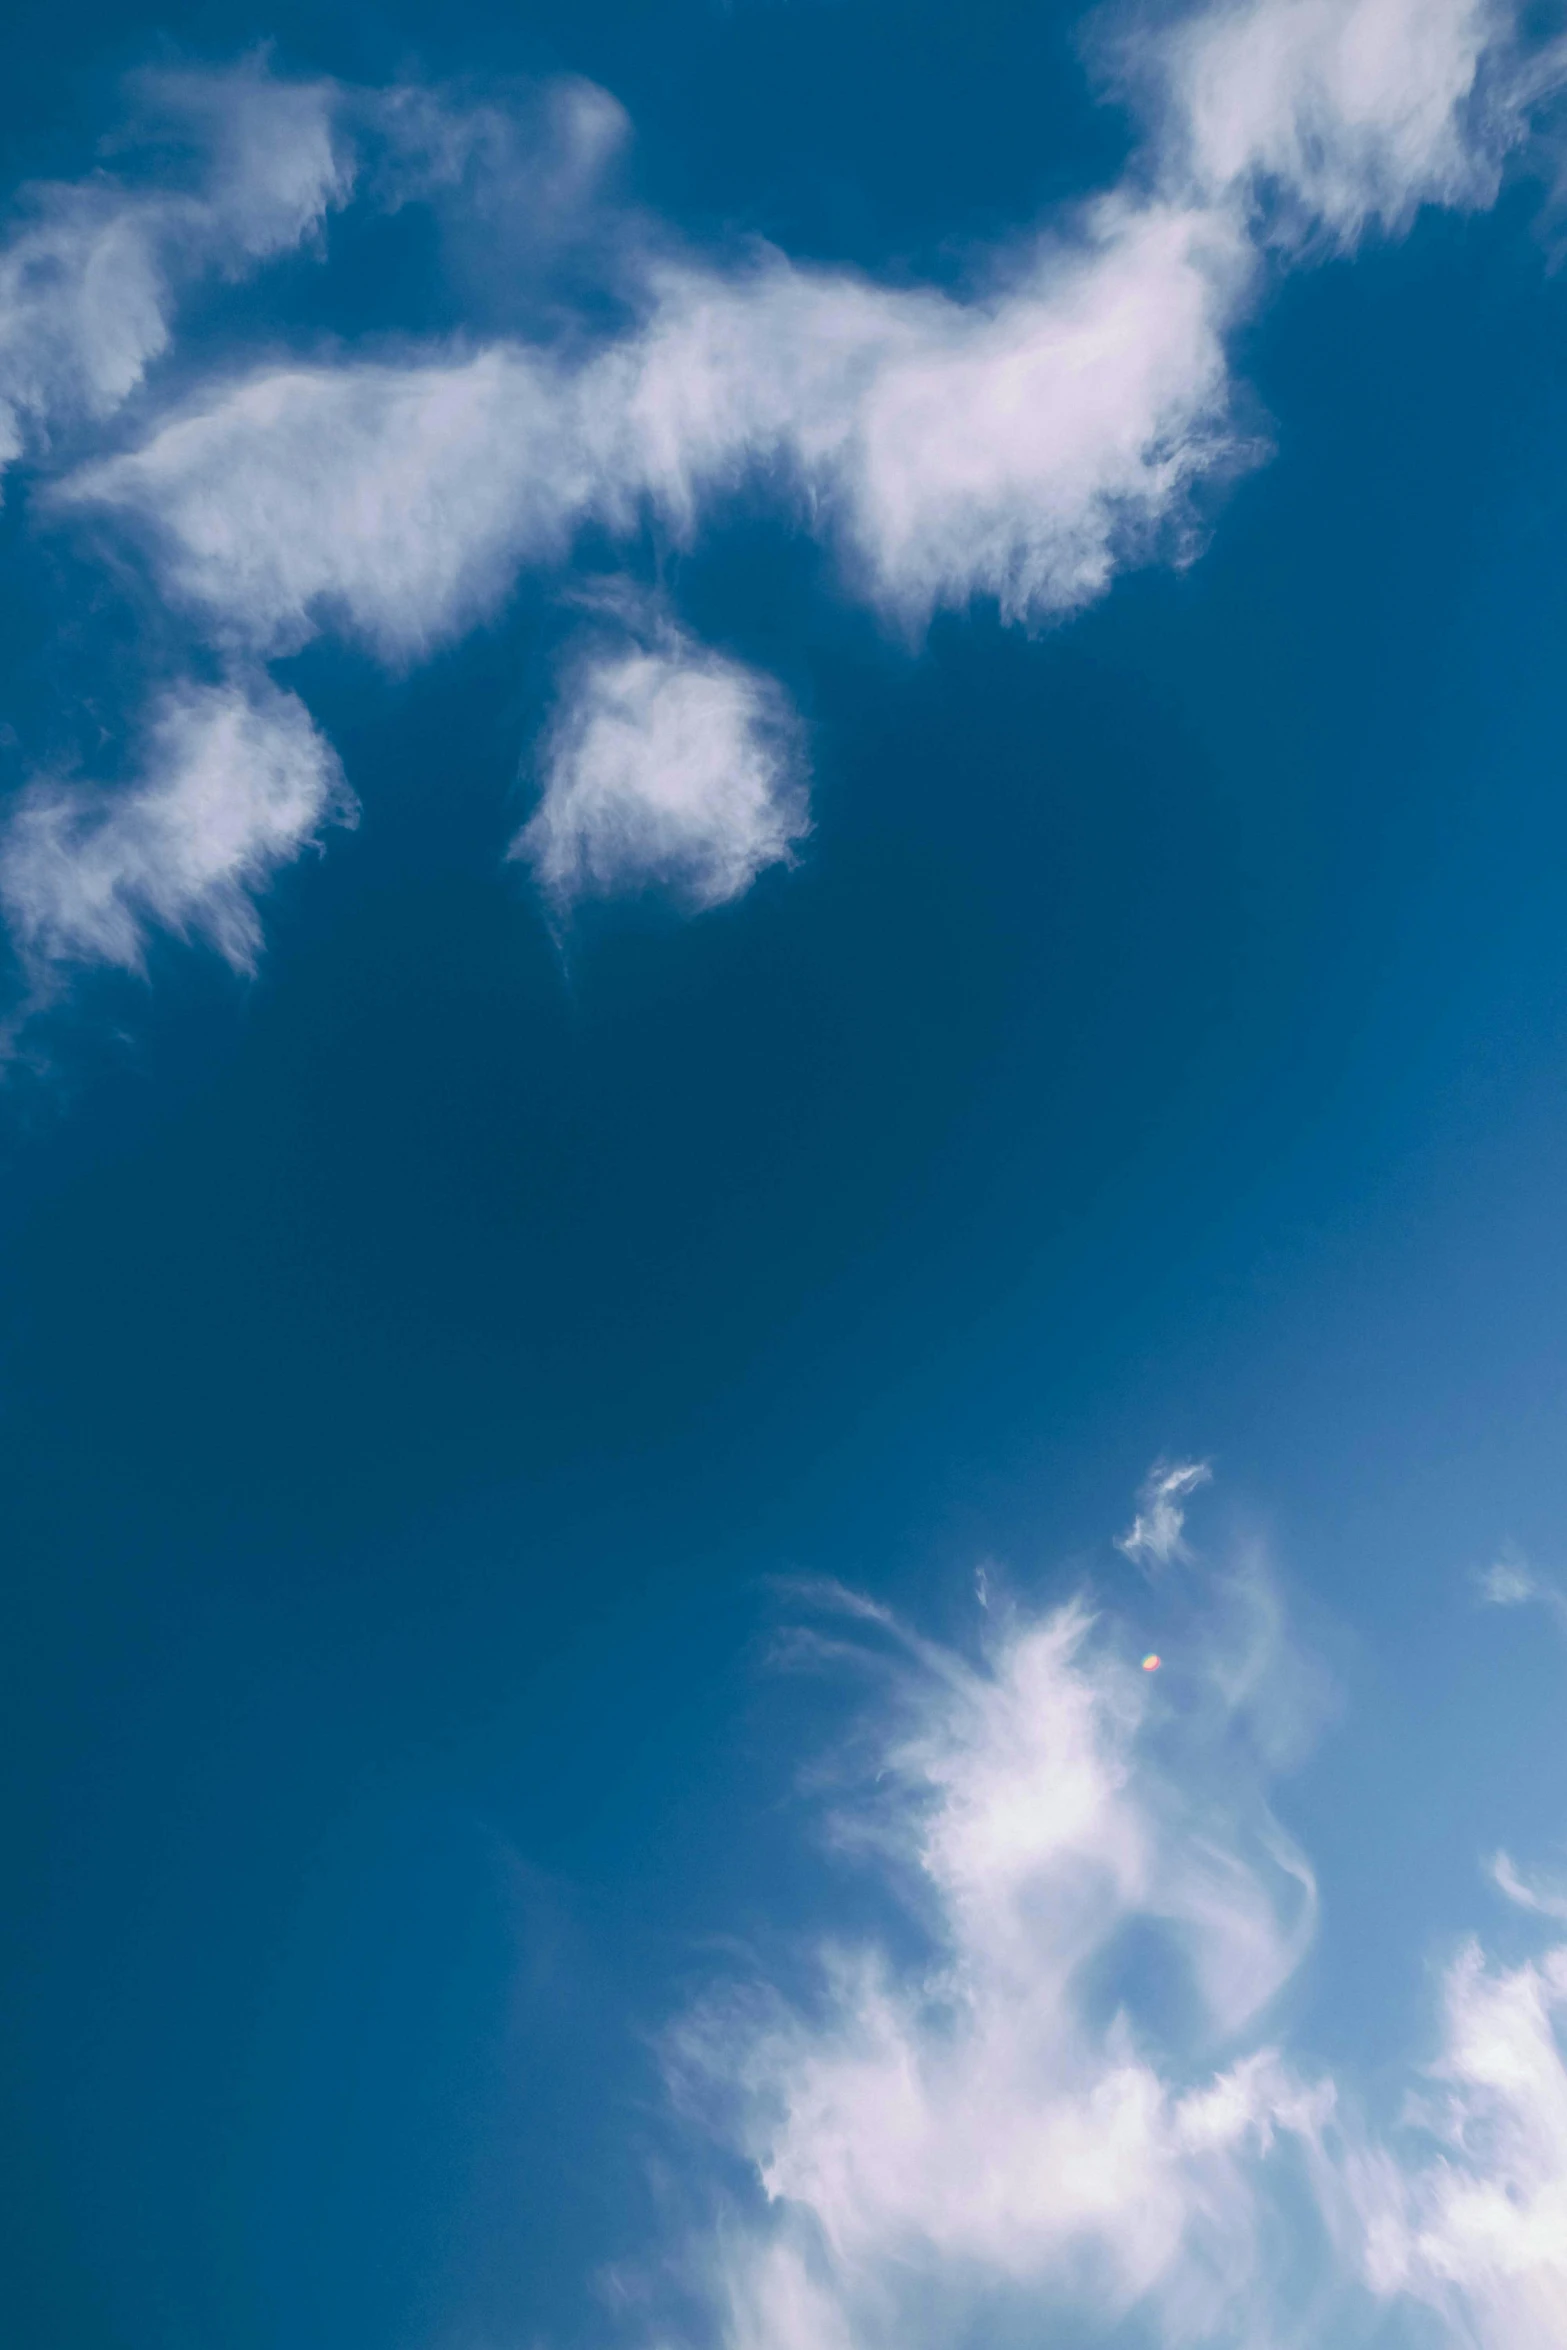 there is a plane that is flying in the sky, unsplash, minimalism, cloud hair, atmospheric blues, ignant, major arcana sky